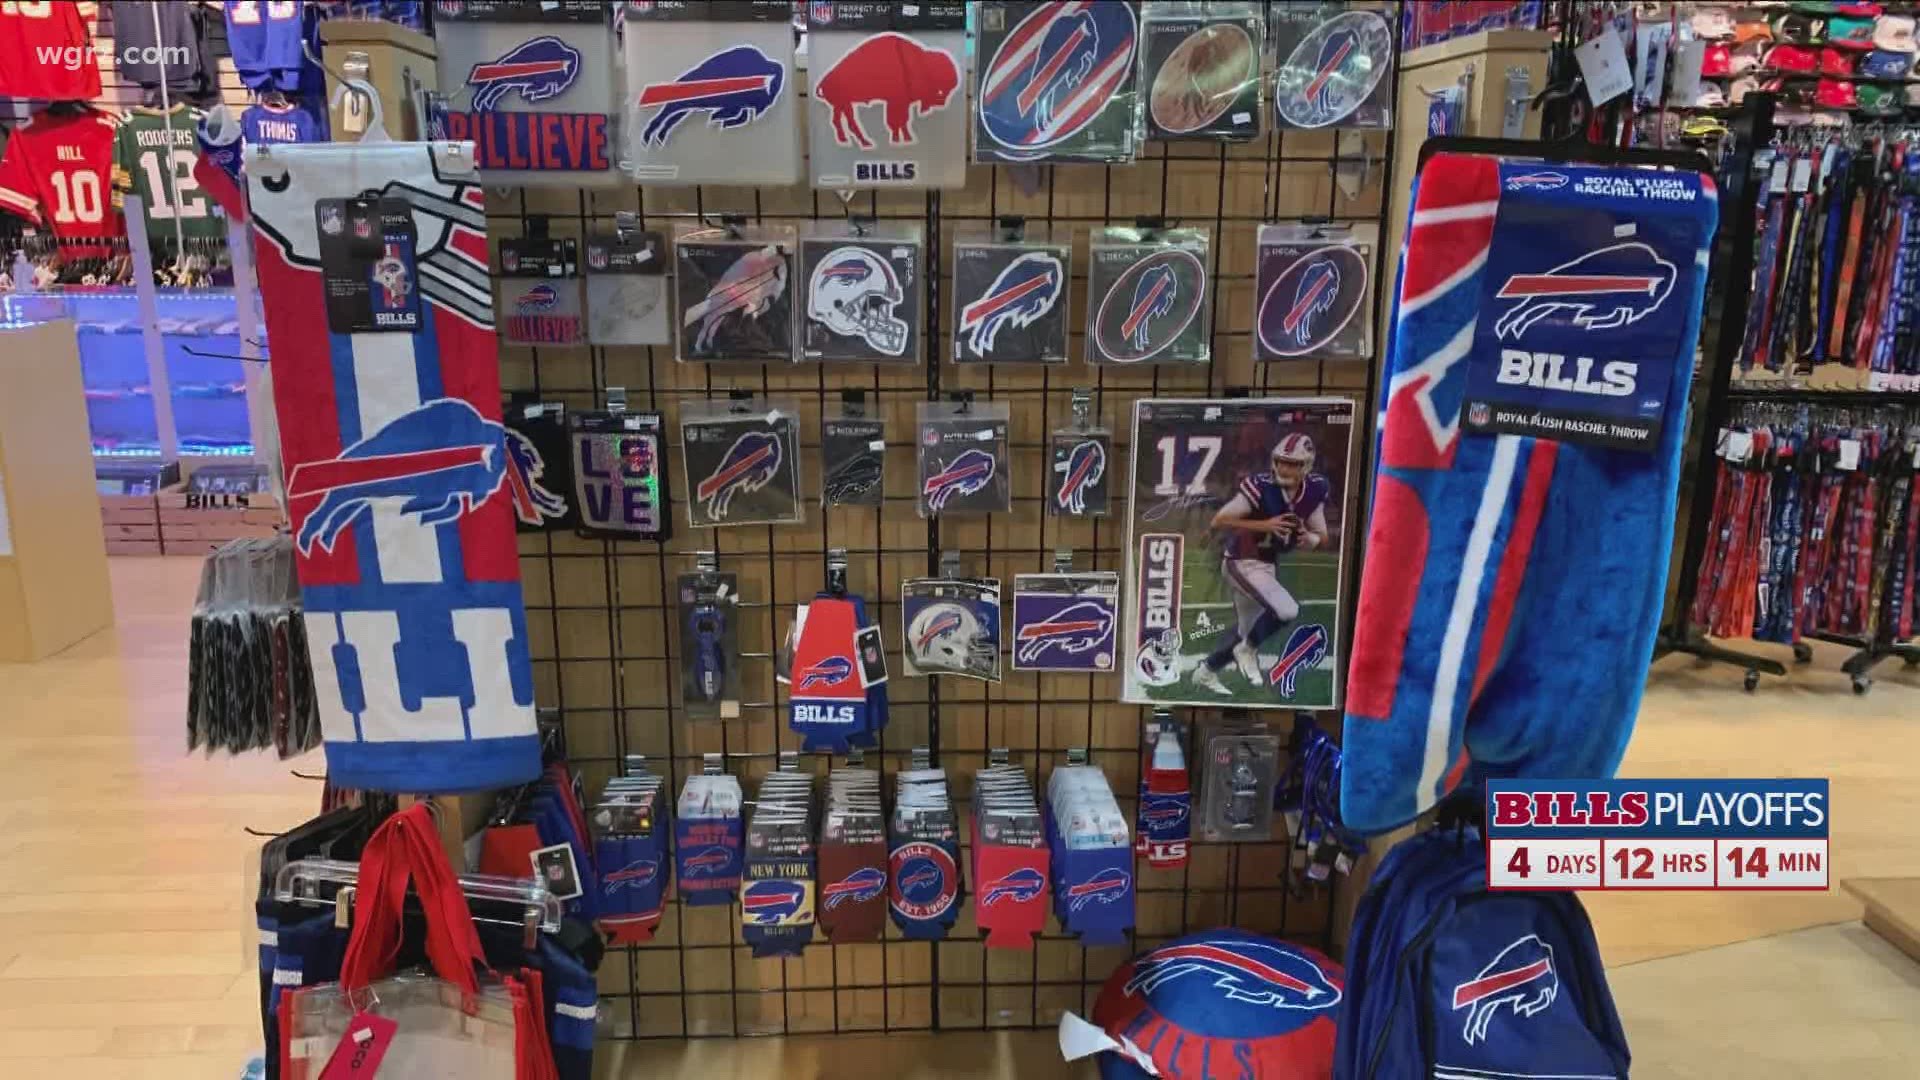 From sports apparel stores to pet shops and bakeries, local businesses are benefitting from the Bills playoff run.